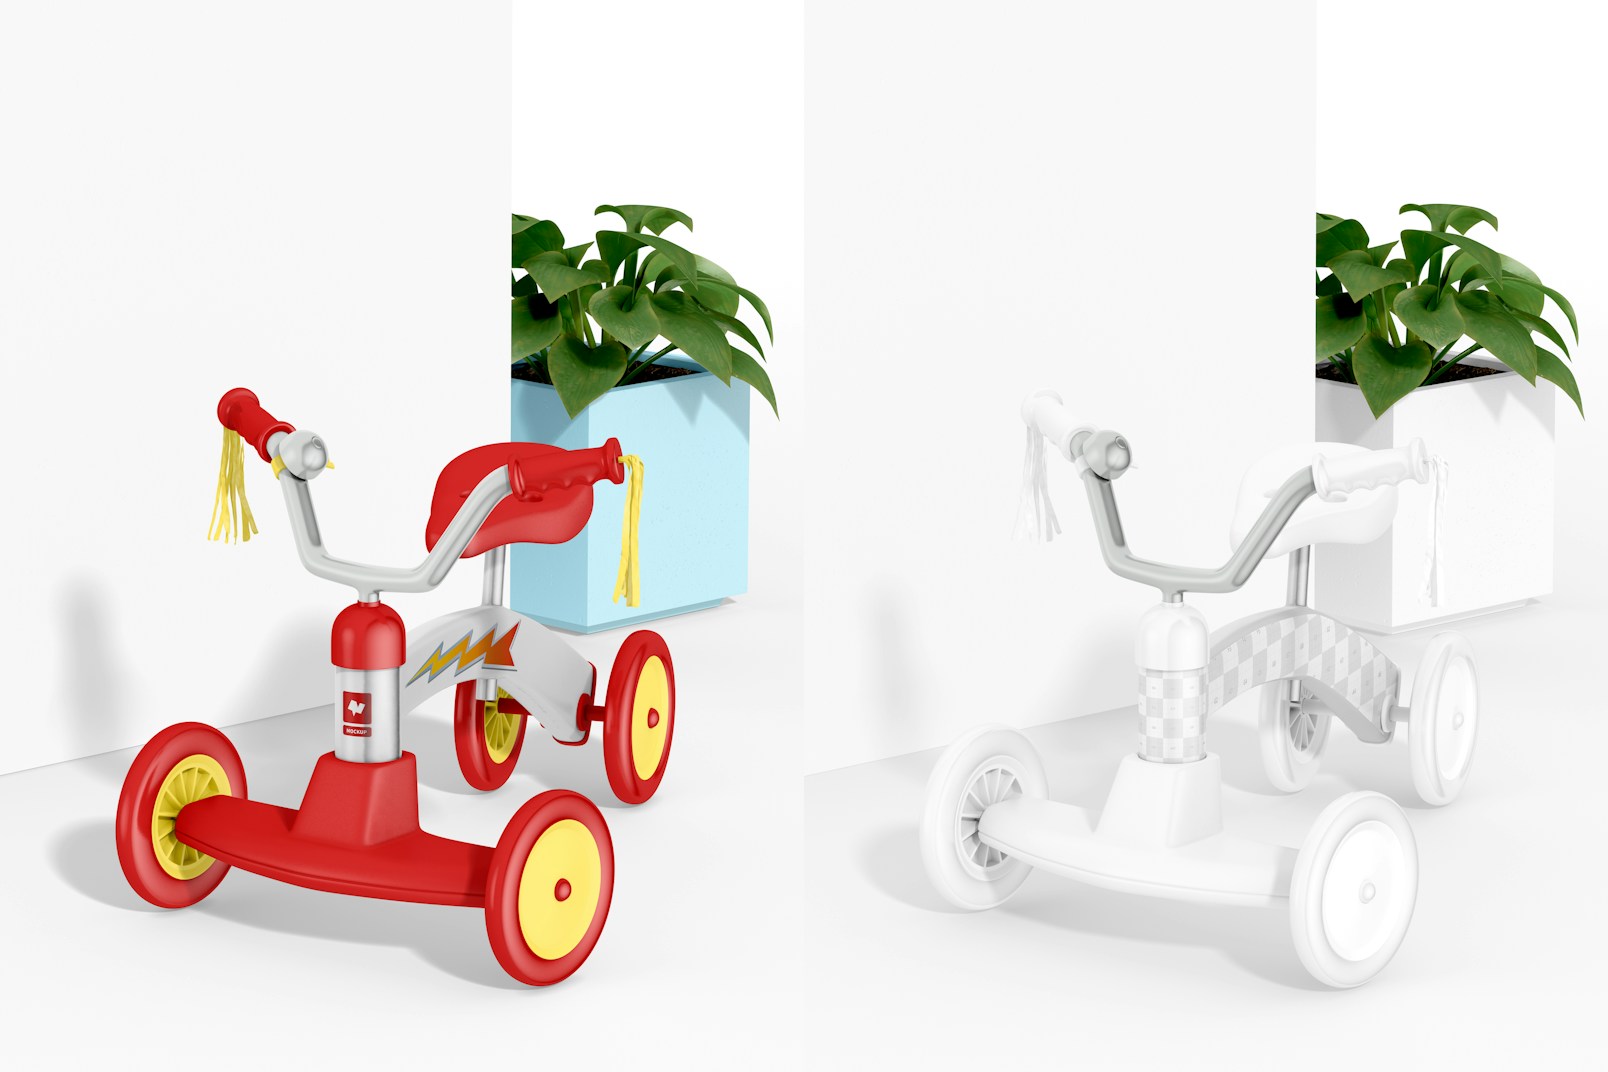 Retro Tricycle Mockup, with Plant Pot